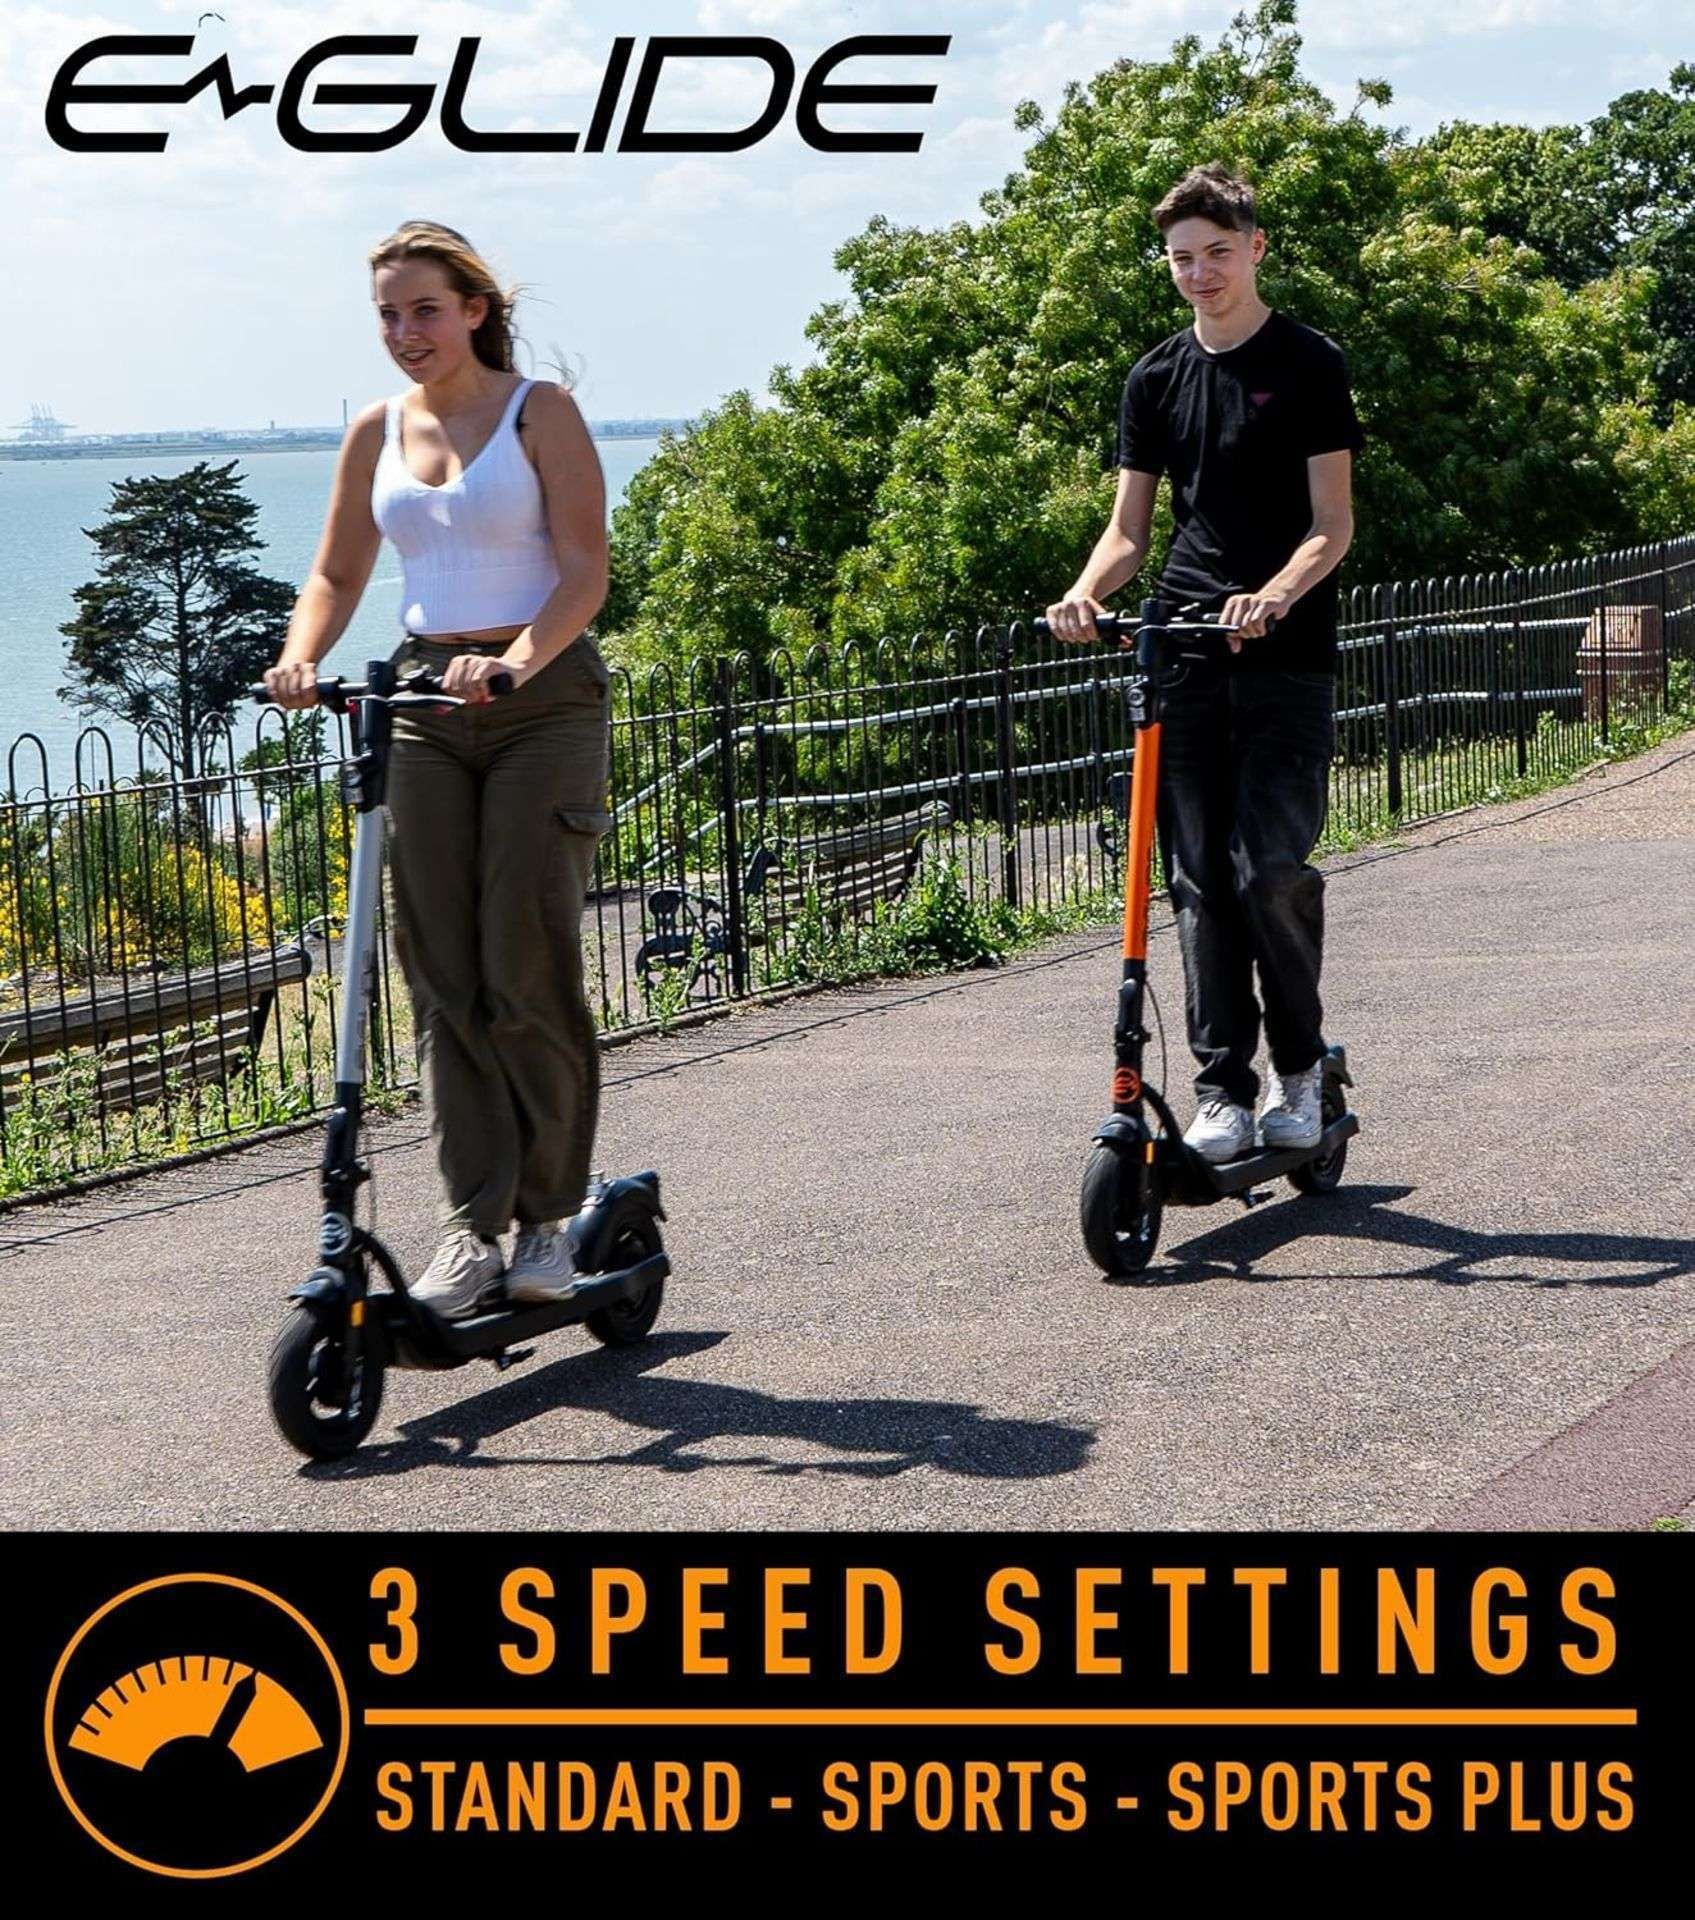 Trade Lot 4 x Brand New E-Glide V2 Electric Scooter Grey and Black RRP £599, Introducing a sleek and - Bild 5 aus 5